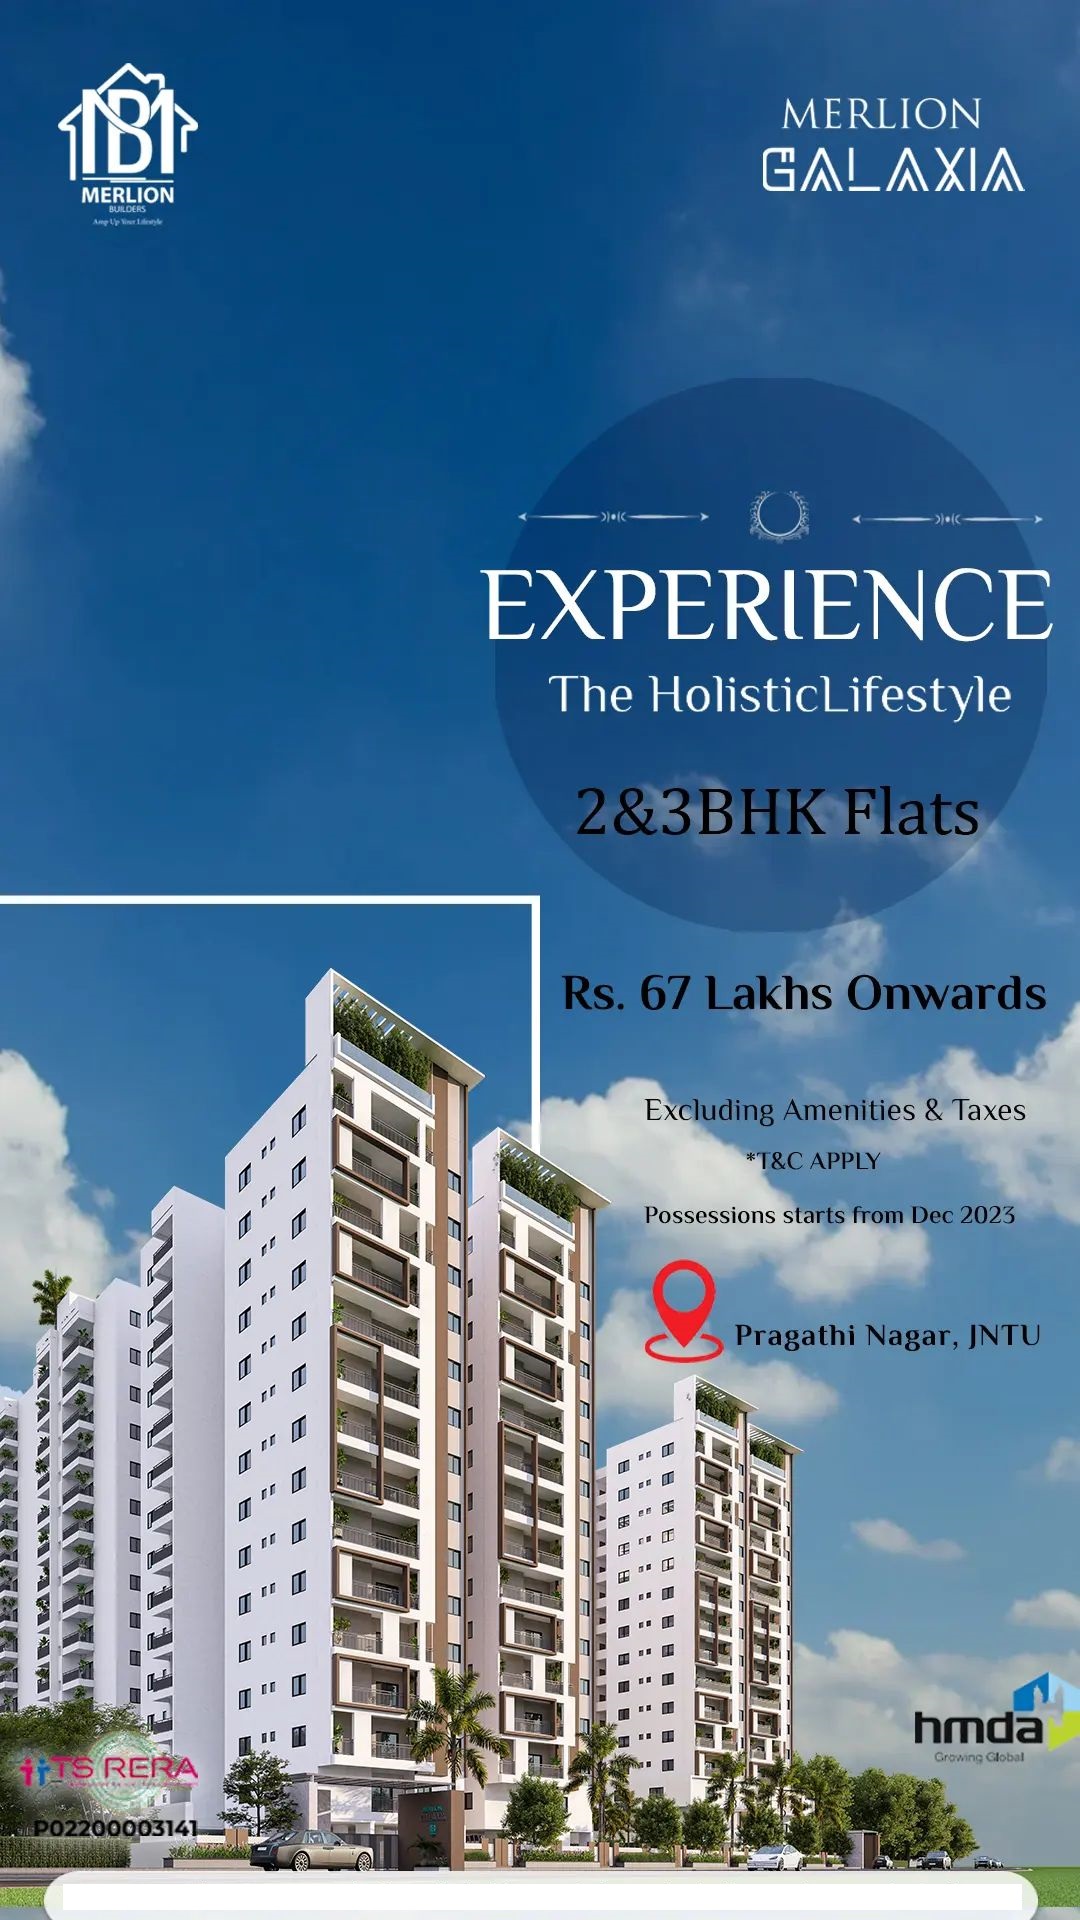 Book 2 & 3 BHK flats Rs. 67 Lac onwards at Merlion Galaxia, Hyderabad Update